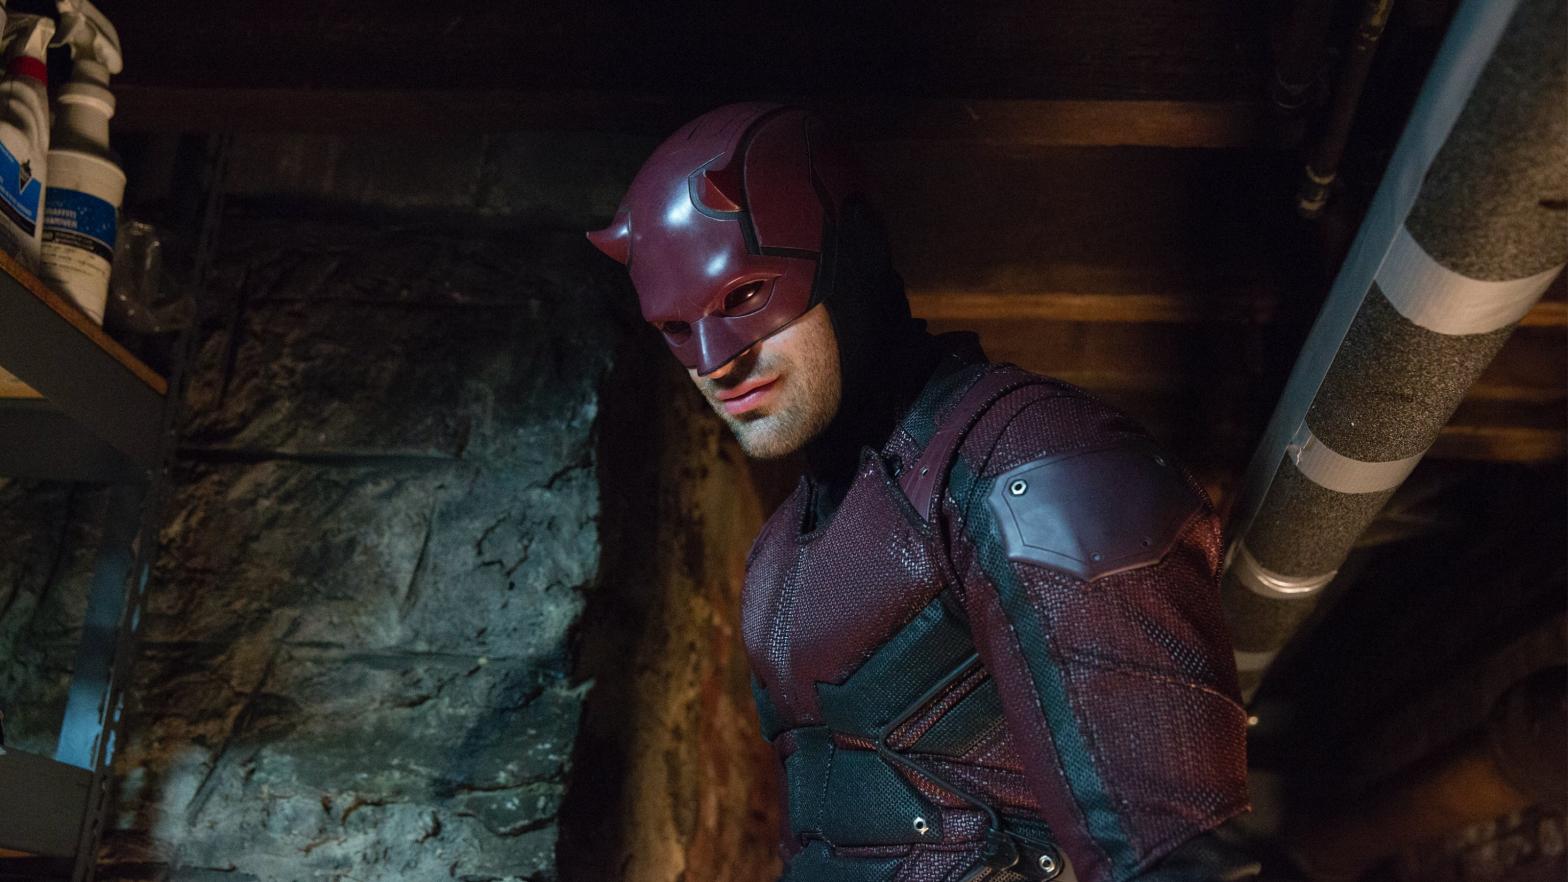 Daredevil grins grimly in his maroon and black armour. (Image: Patrick Harbron/Netflix)